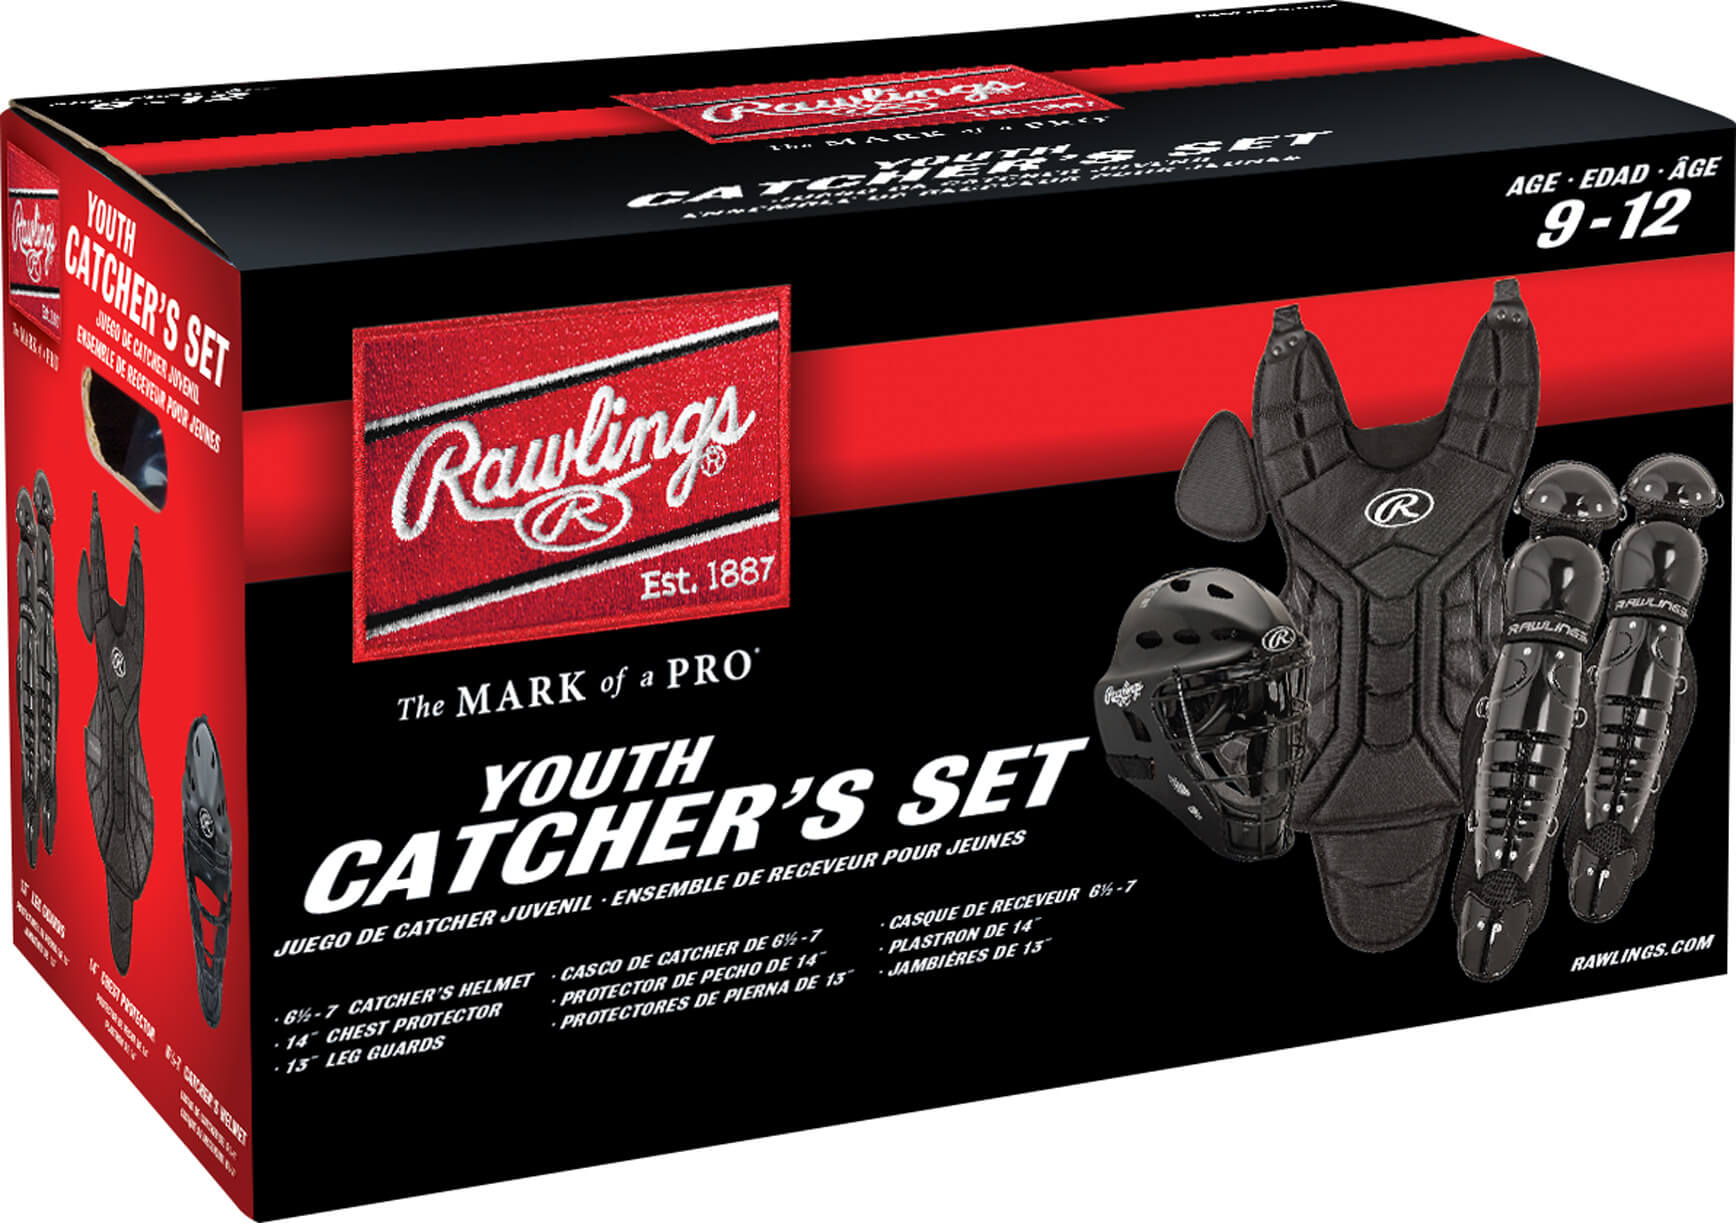 Rawlings Players Series Catchers Set Ages 9-12